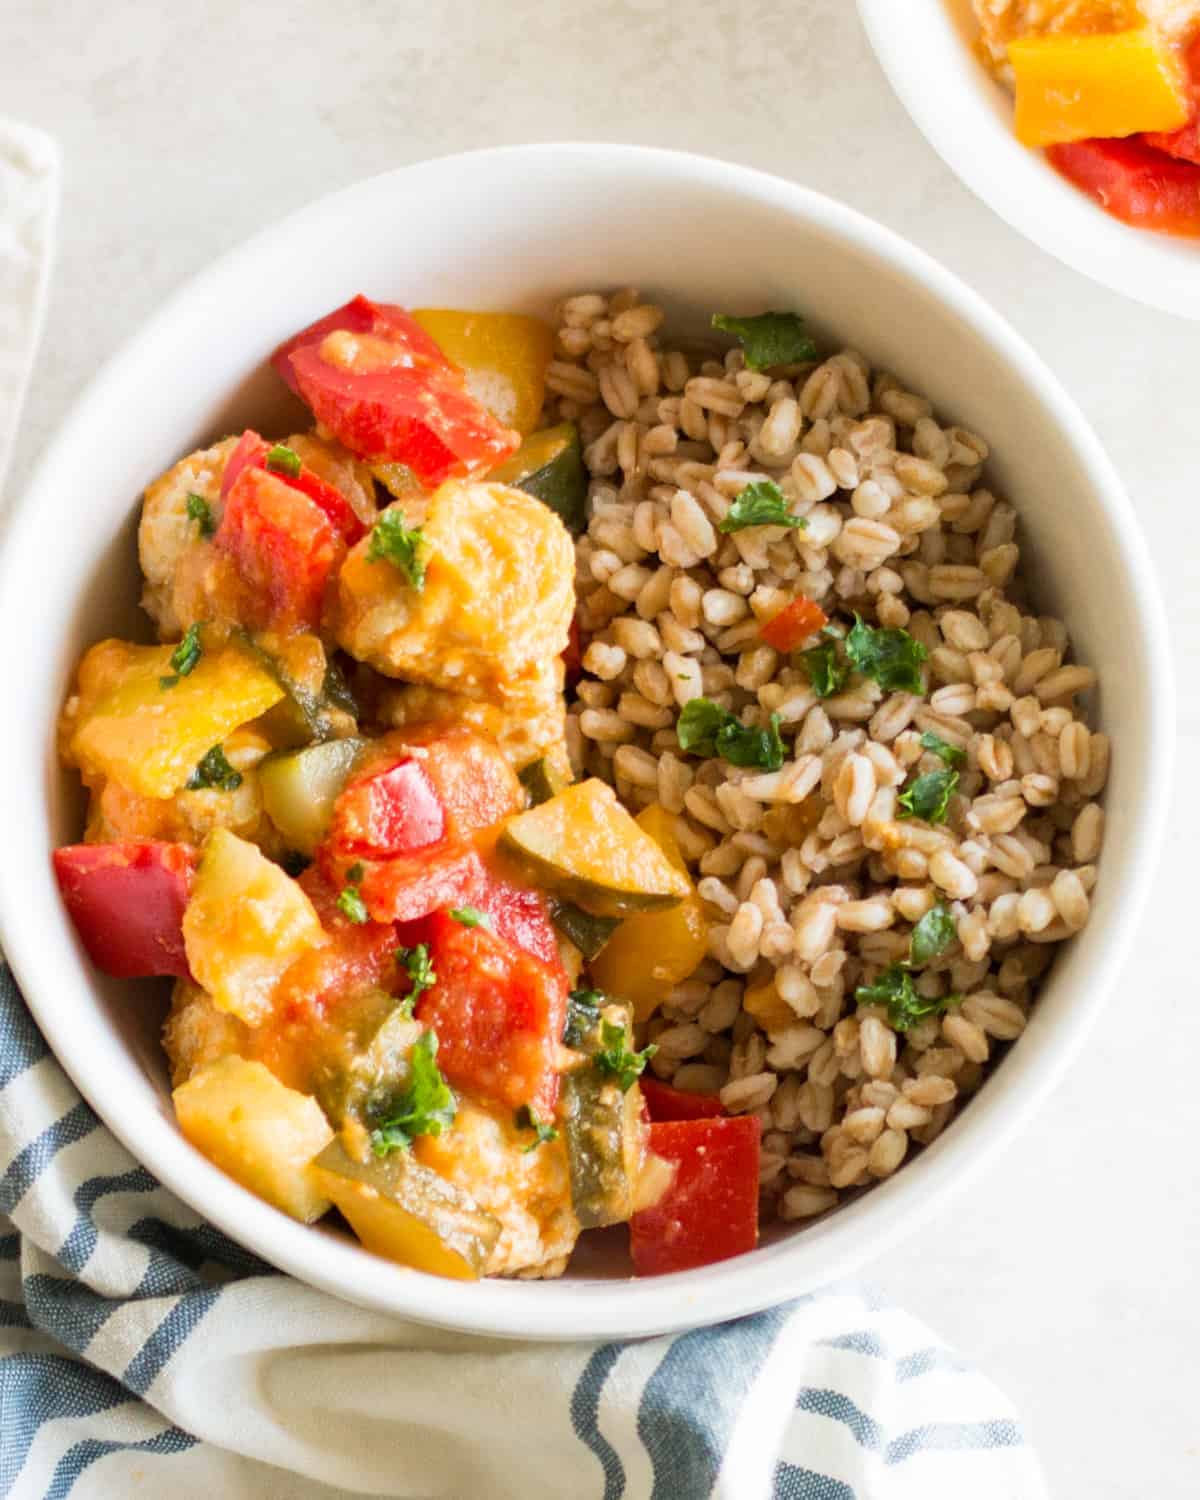 cooked sweet and sour meatballs with vegetables and farro in a white bowl